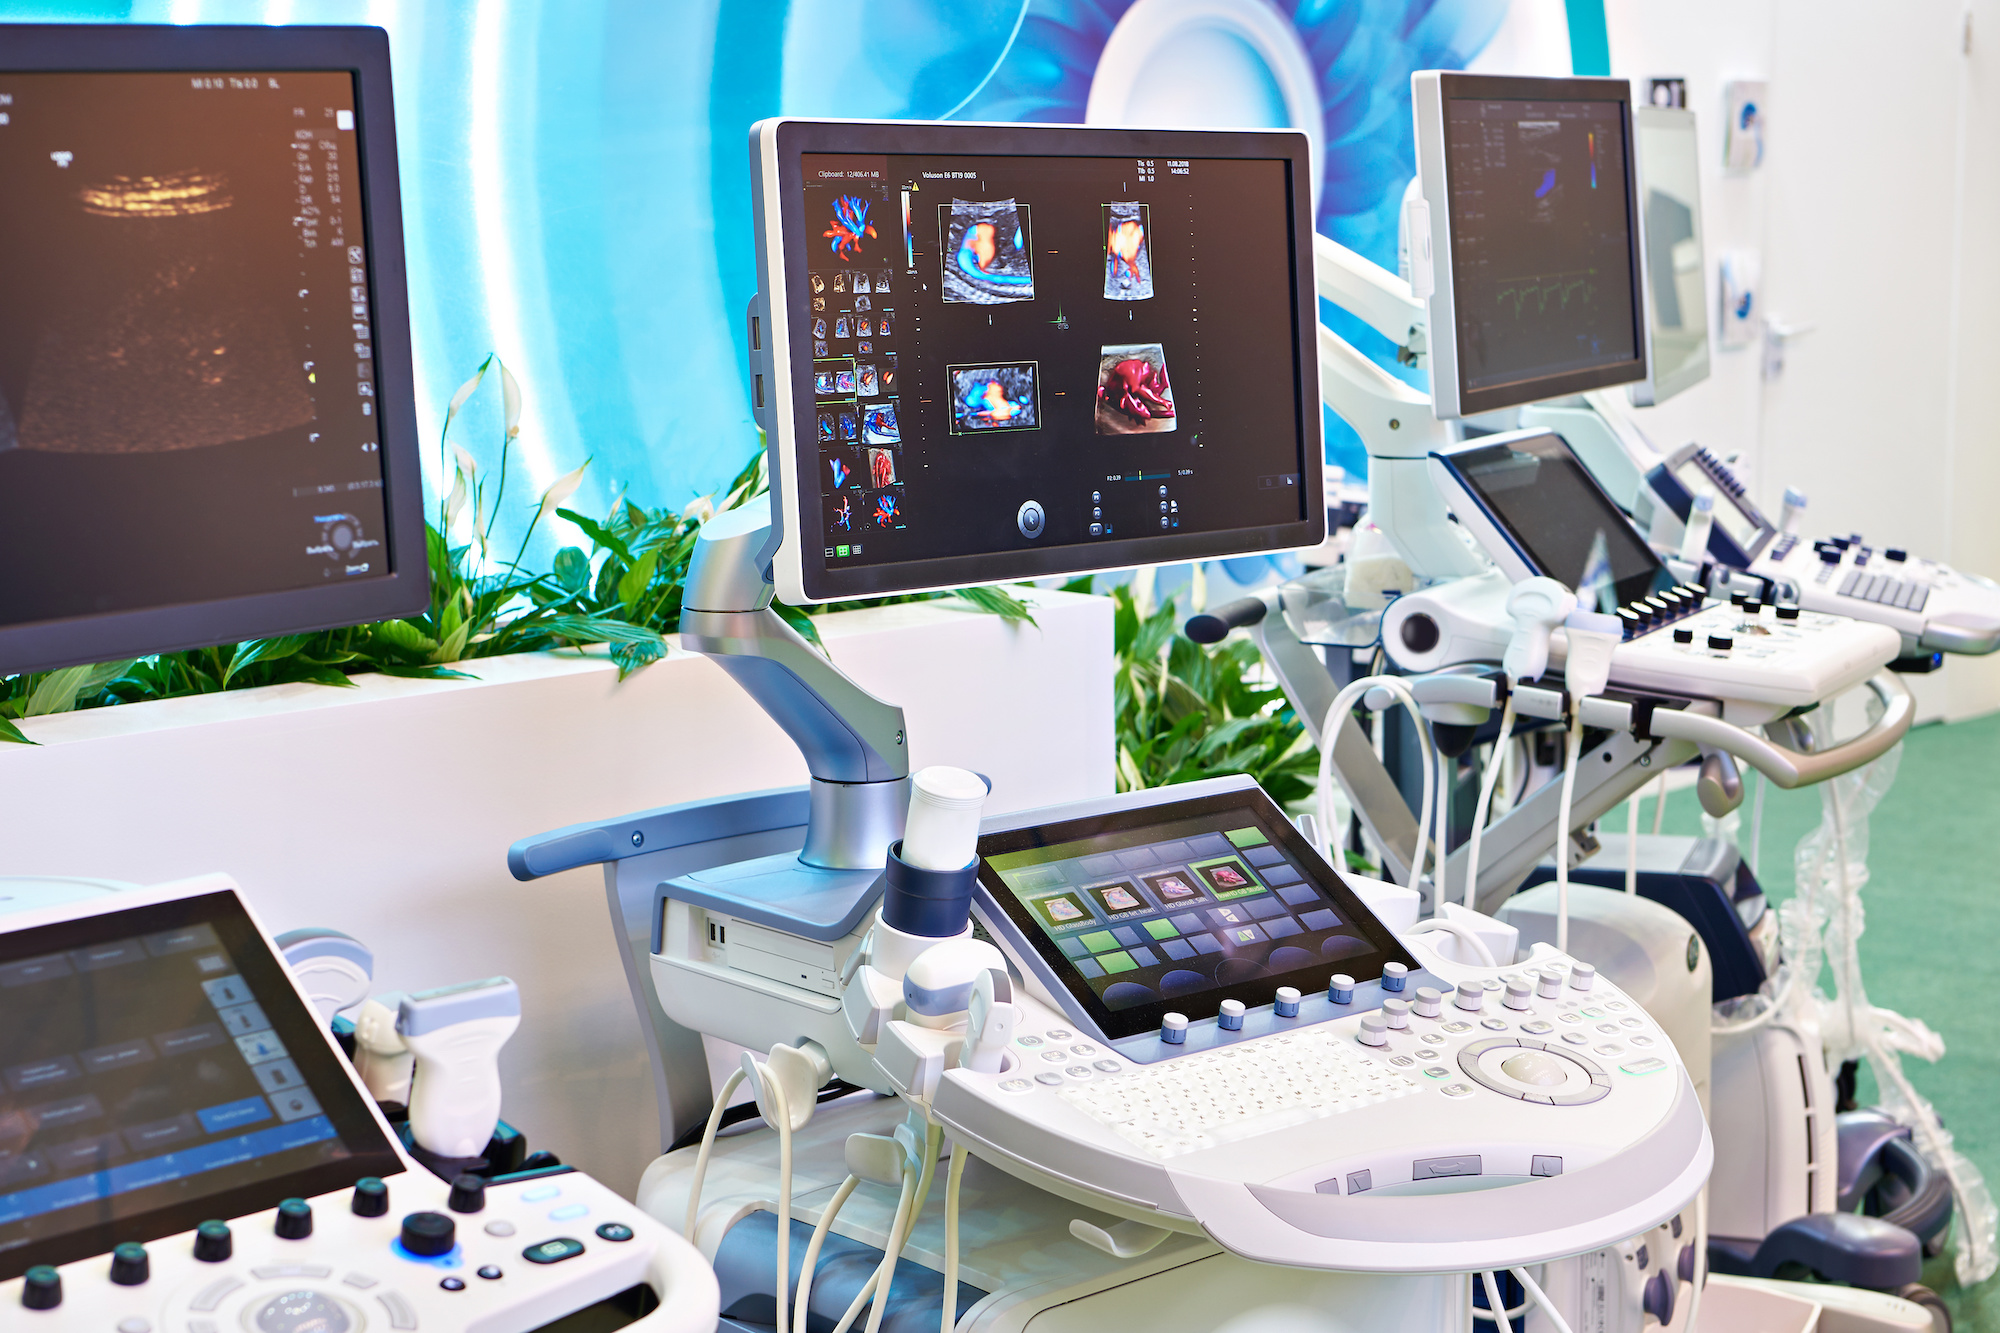 Medical devices for ultrasound examination on exhibition